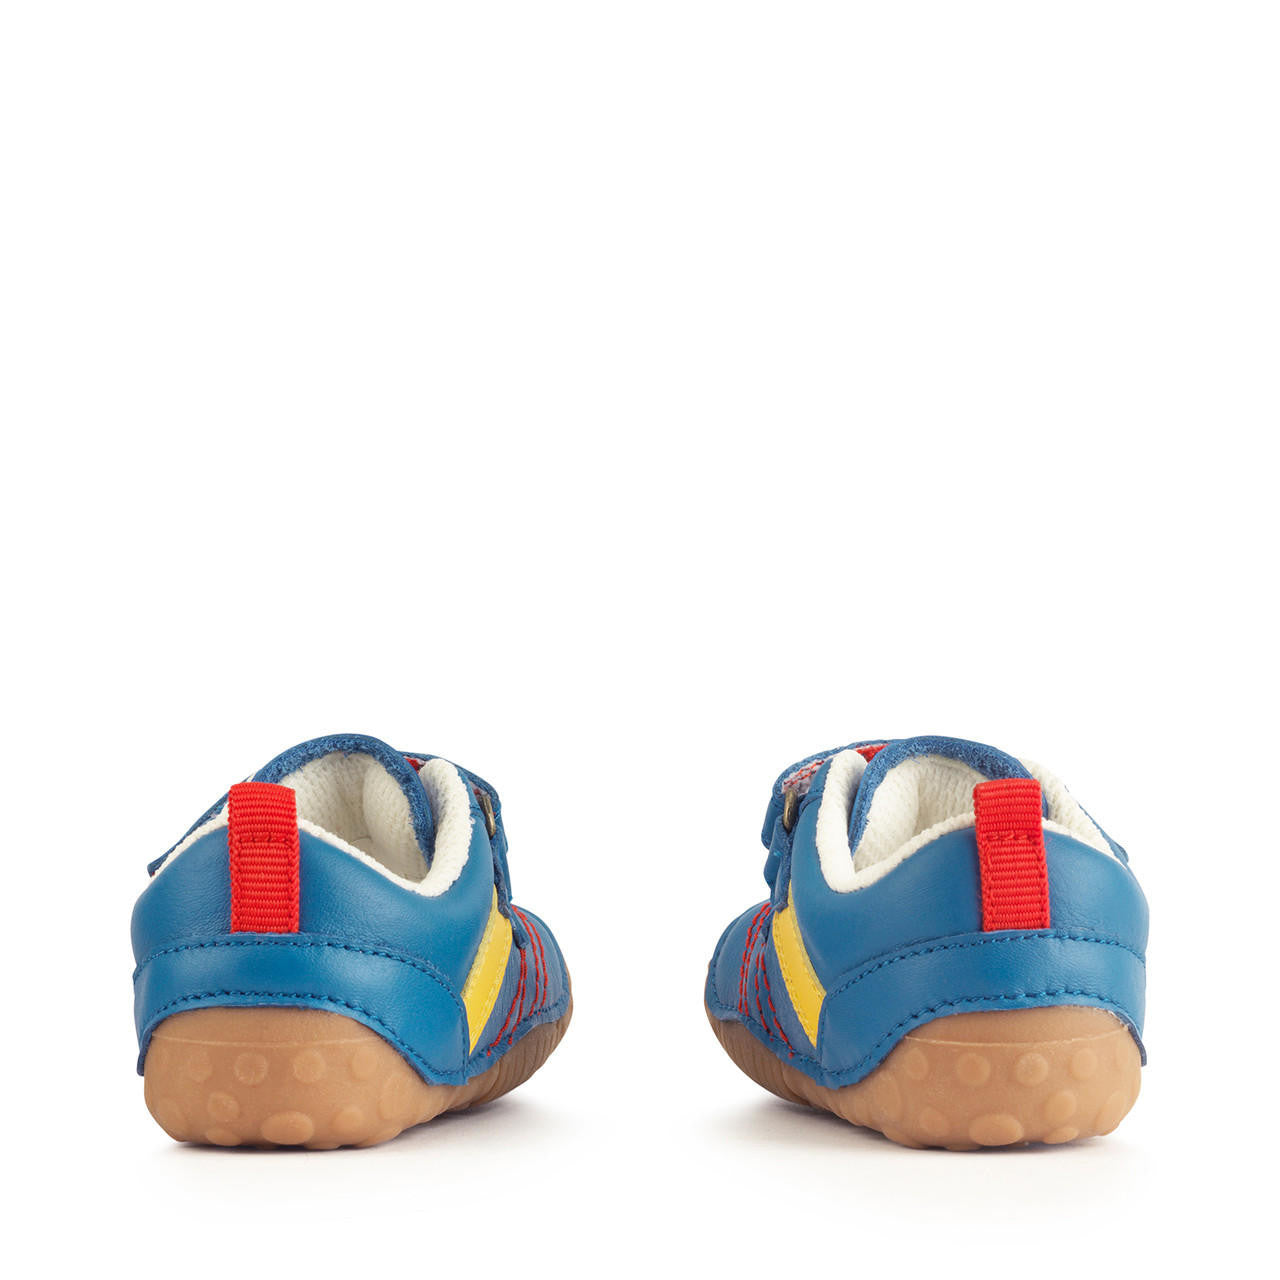 A boys pre-walker by Start-Rite, style Little Smile. In blue leather multi with double velcro fastening and toe bumper. View from back.